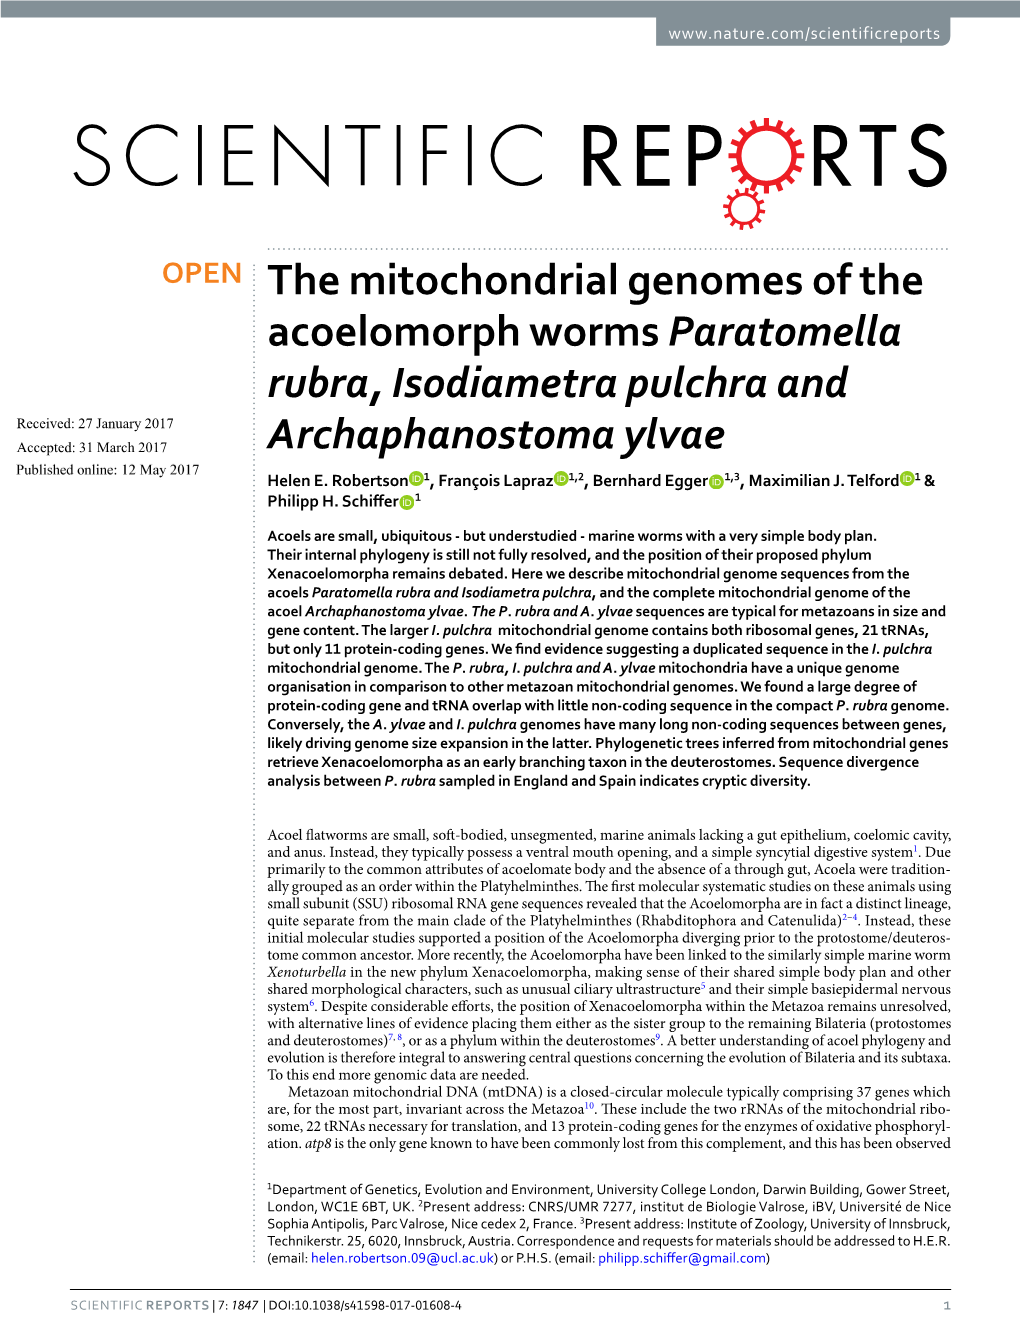 The Mitochondrial Genomes of the Acoelomorph Worms Paratomella